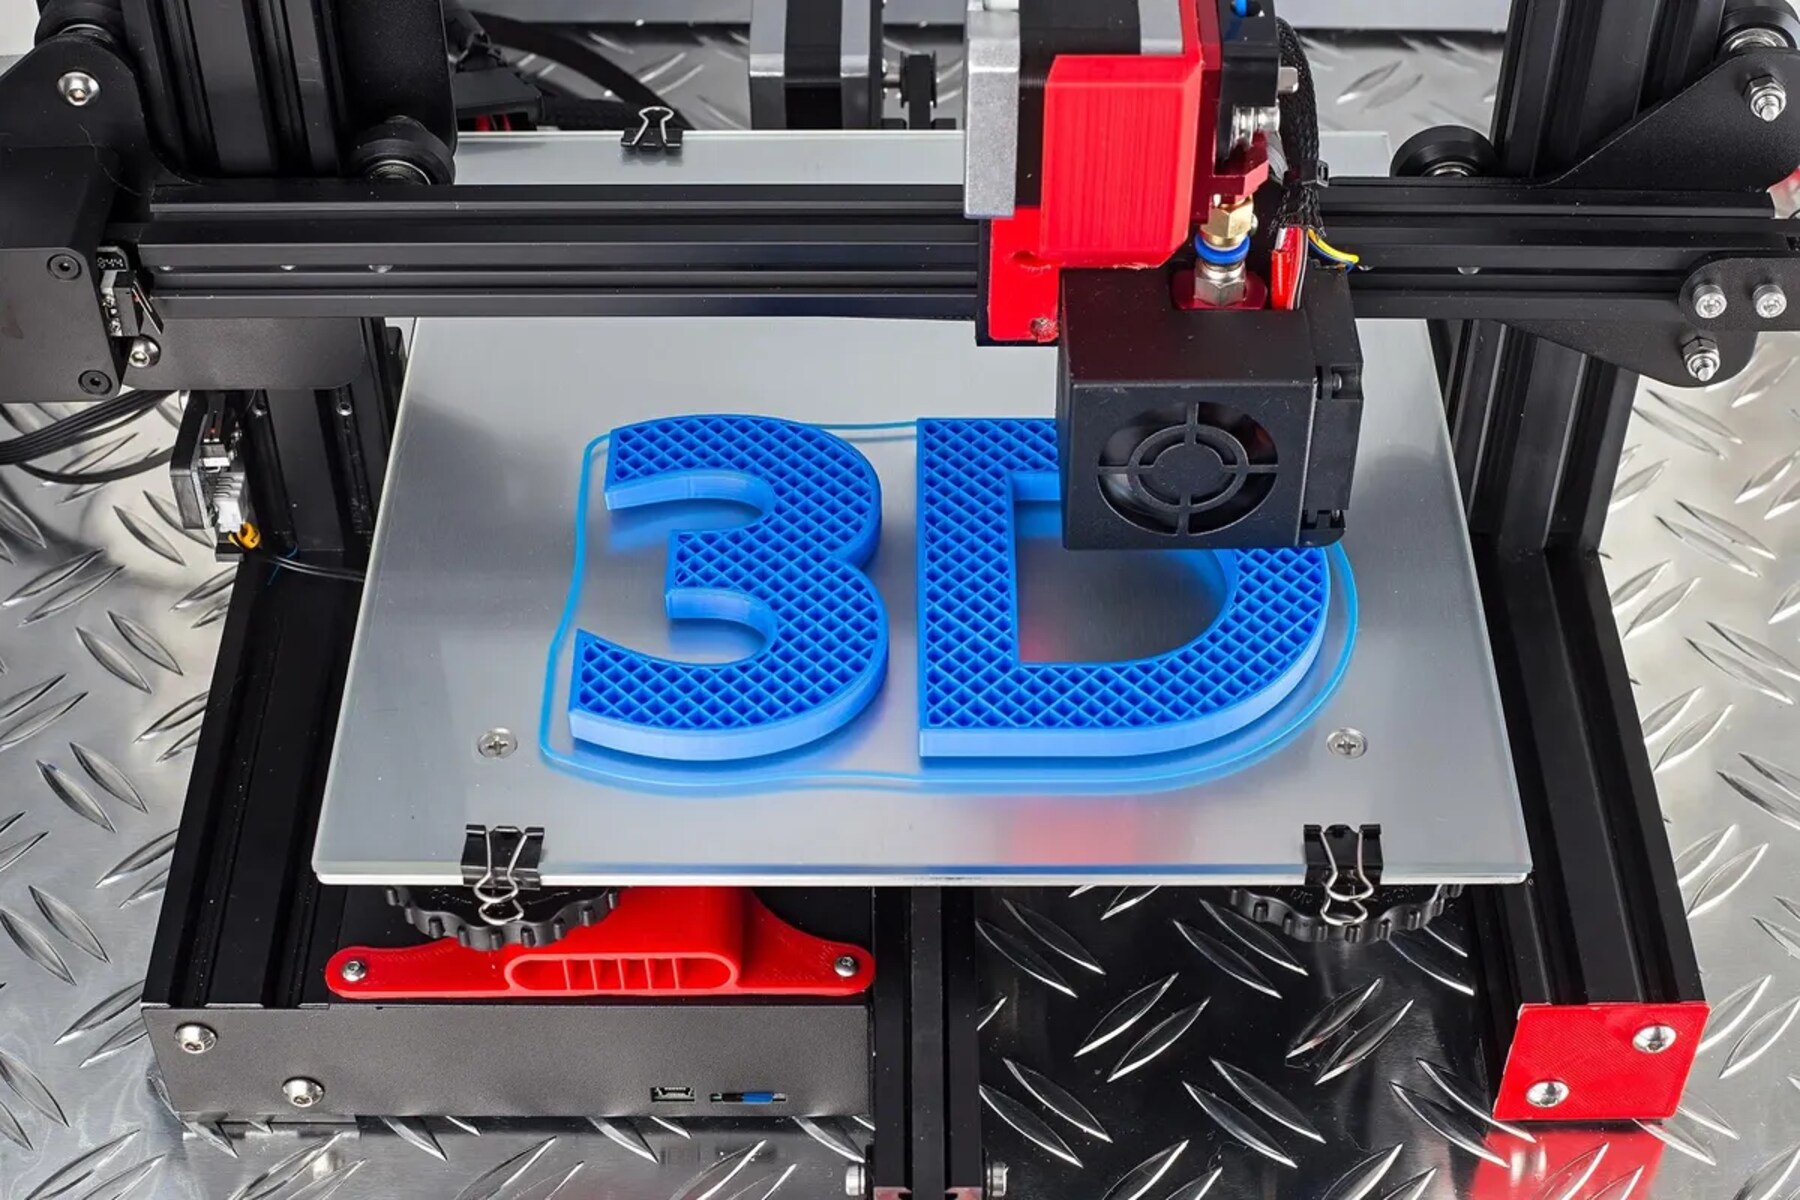 what-are-three-uses-of-3d-printing